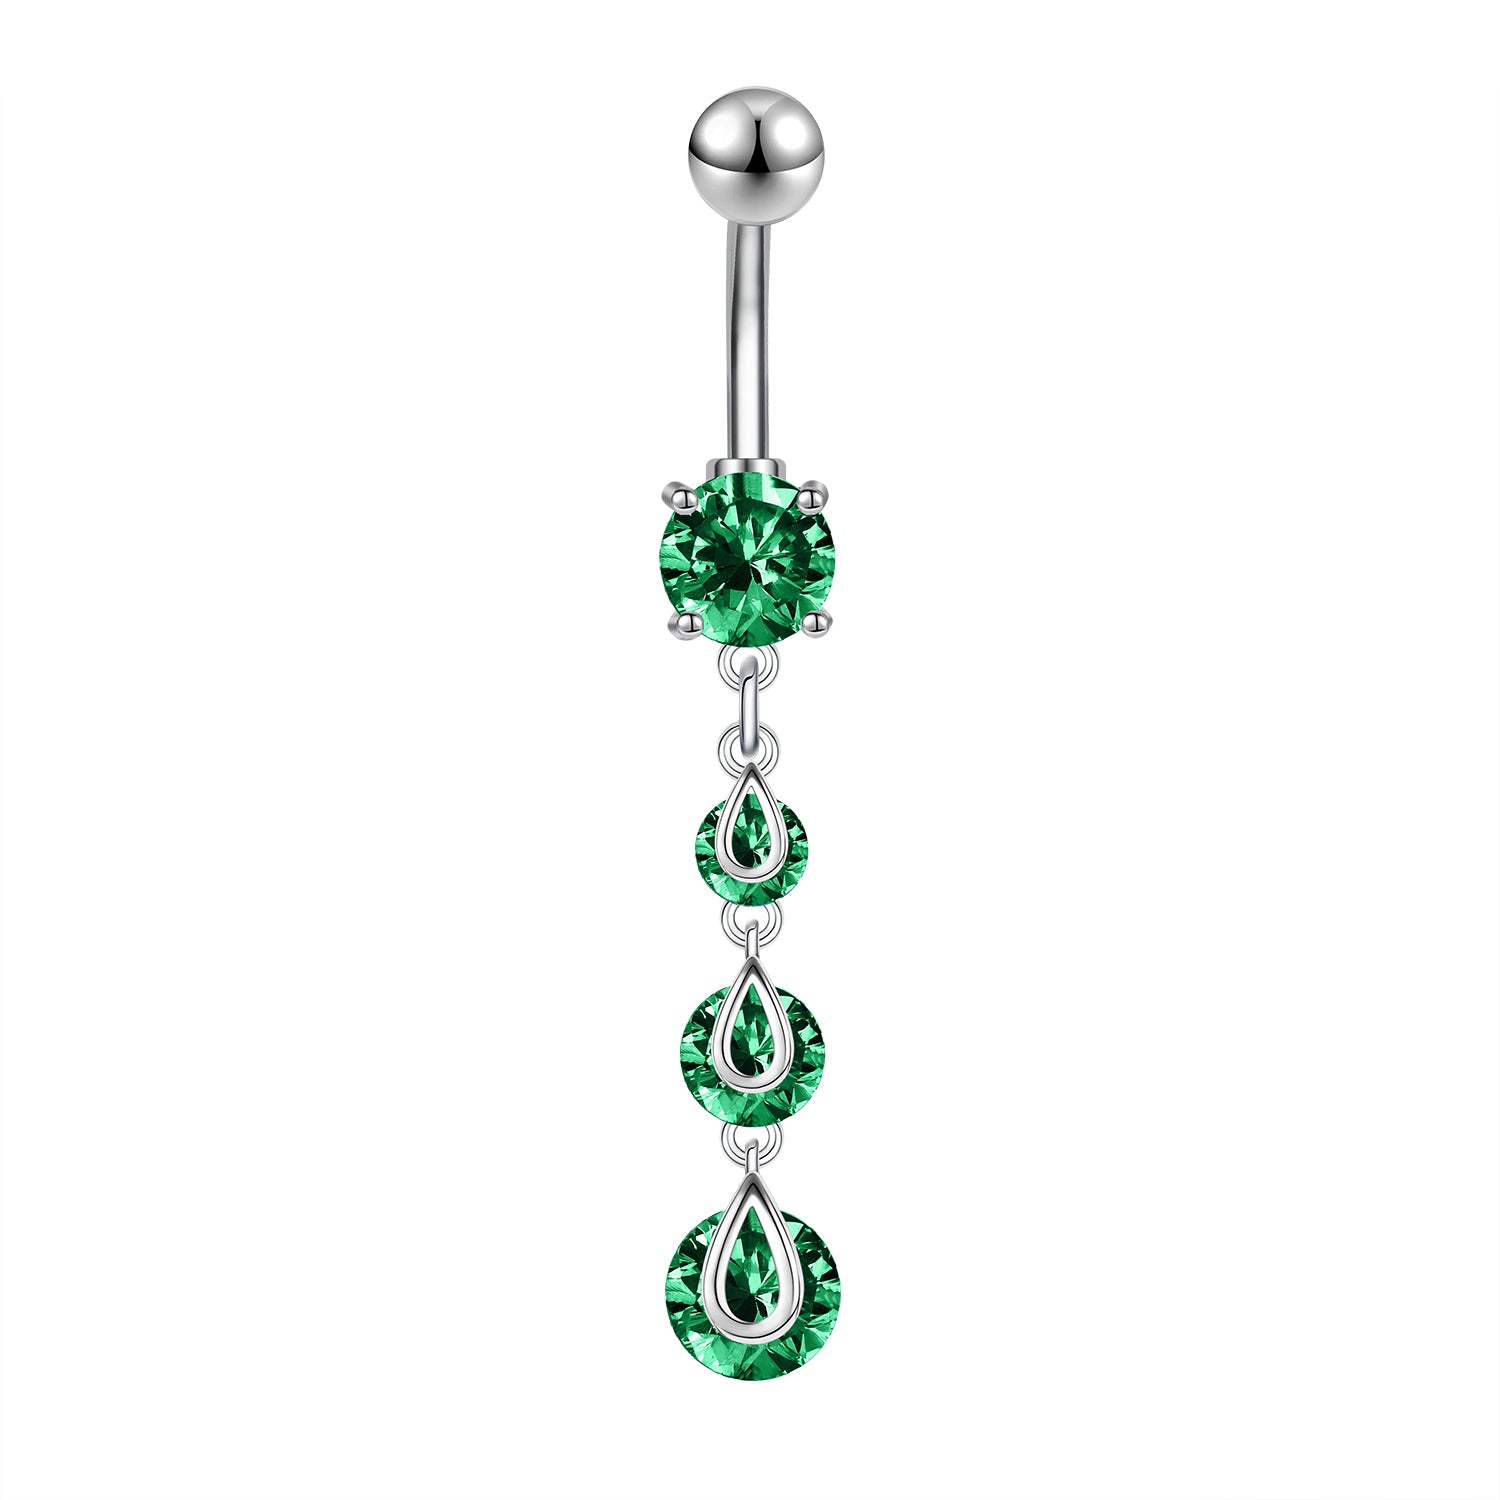 14G Stainless Steel Belly Navel Rings Green Zircon Belly Button Rings